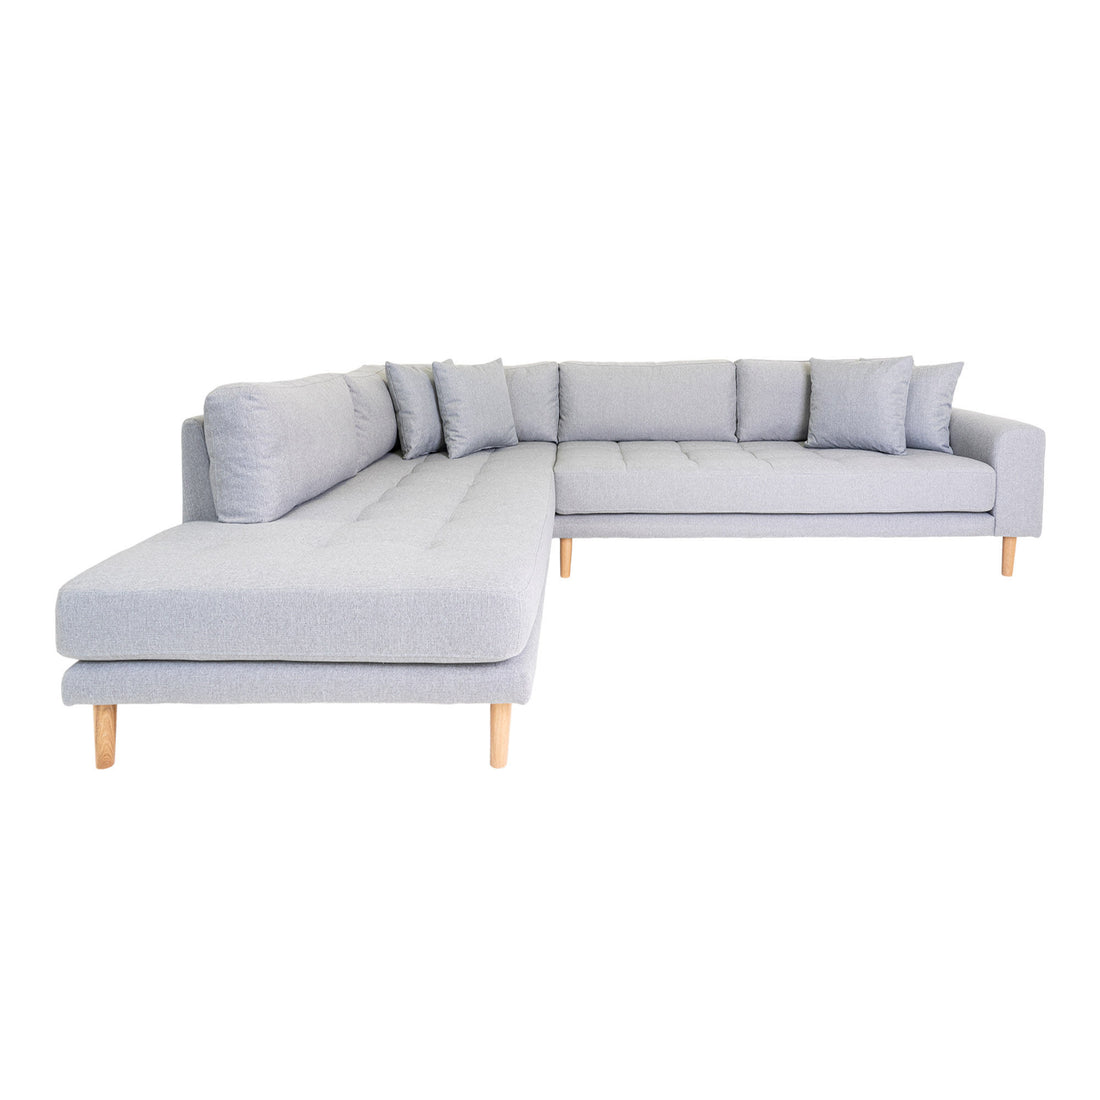 Lido Corner sofa Open End - Corner sofa Open than, left -wing in light gray with four pillows and nature wooden legs, HN1001 - 1 - pcs